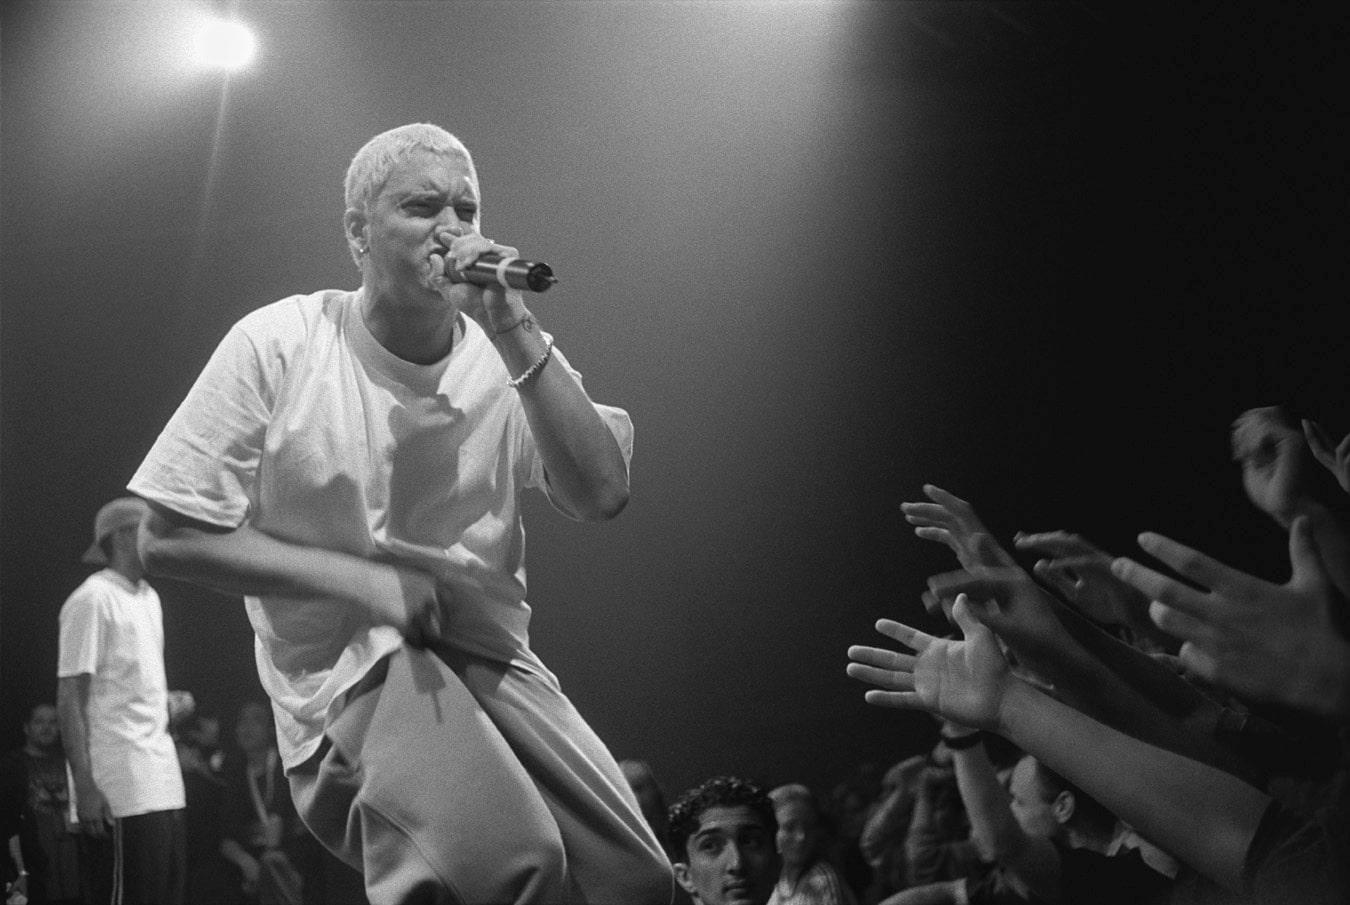 Eminem on stage in Munich in October 1999. Photo: Mika Photography